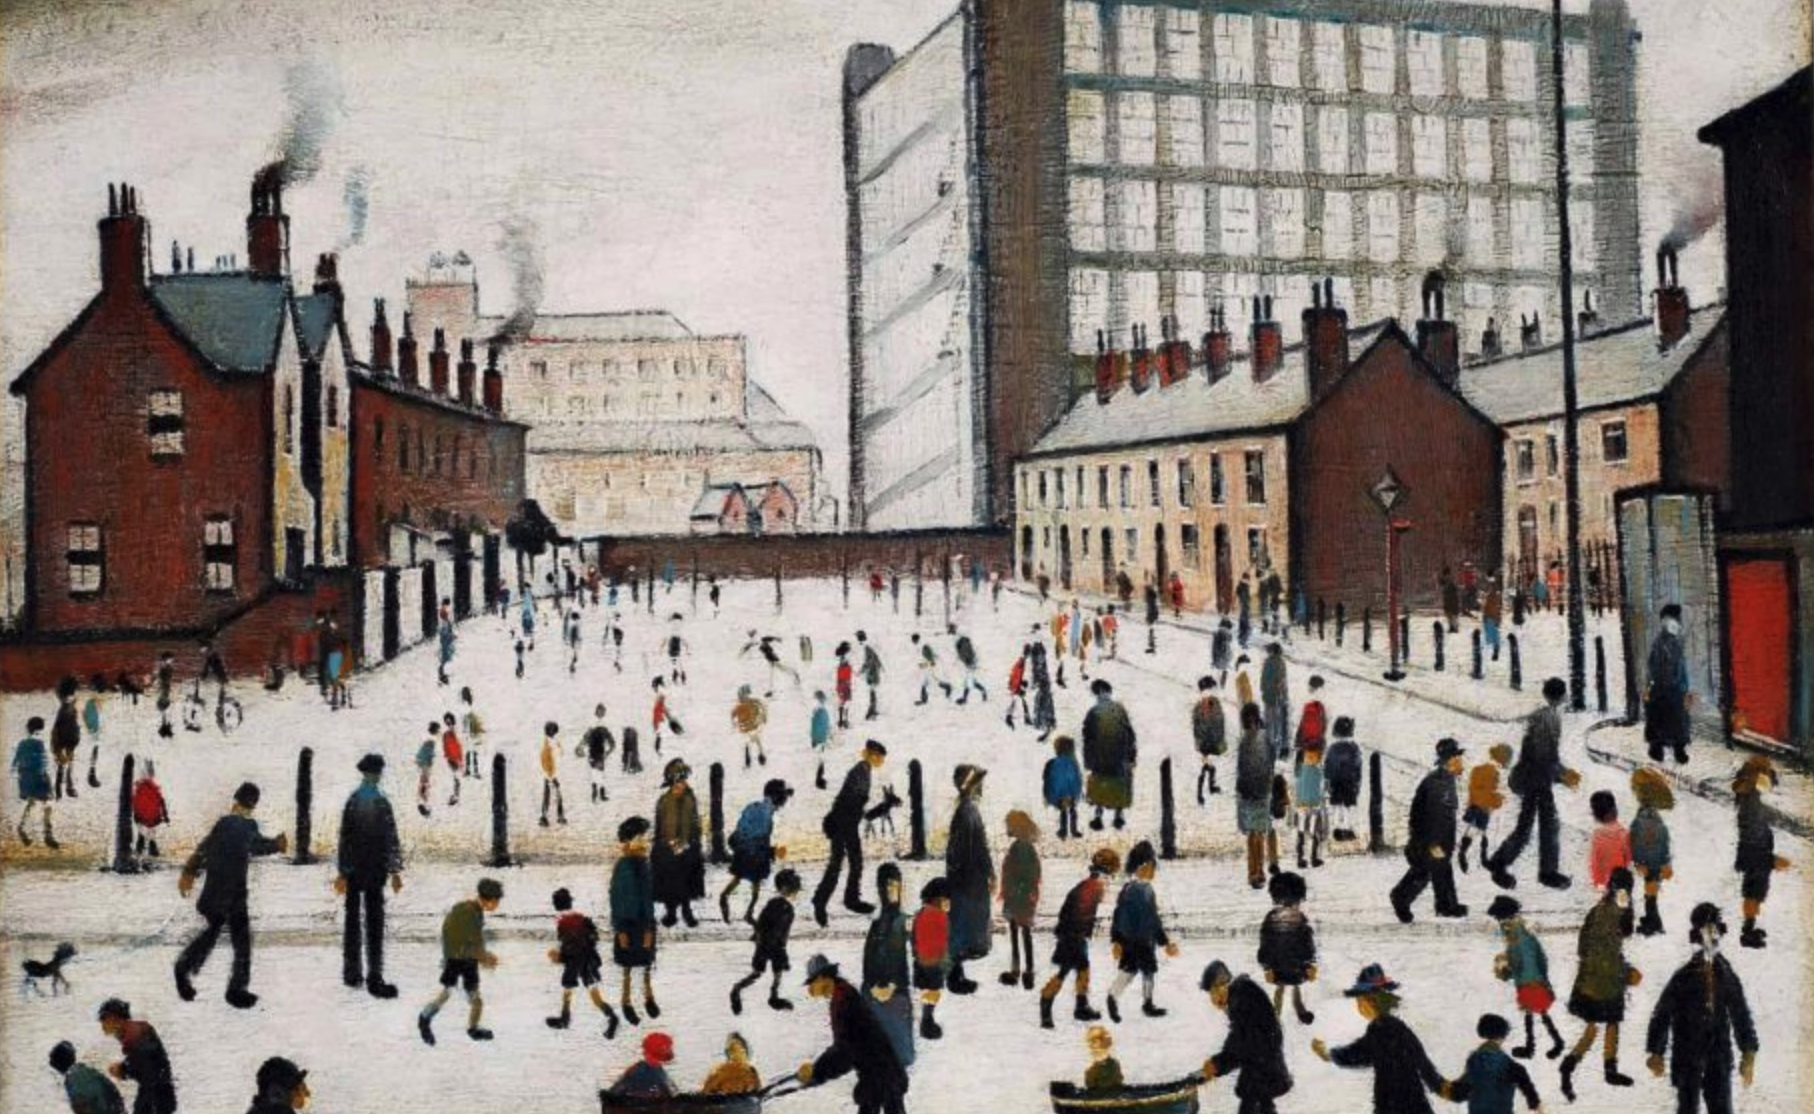 The Mill, Pendlebury (1943) by Laurence Stephen Lowry (1887 - 1976), English artist.